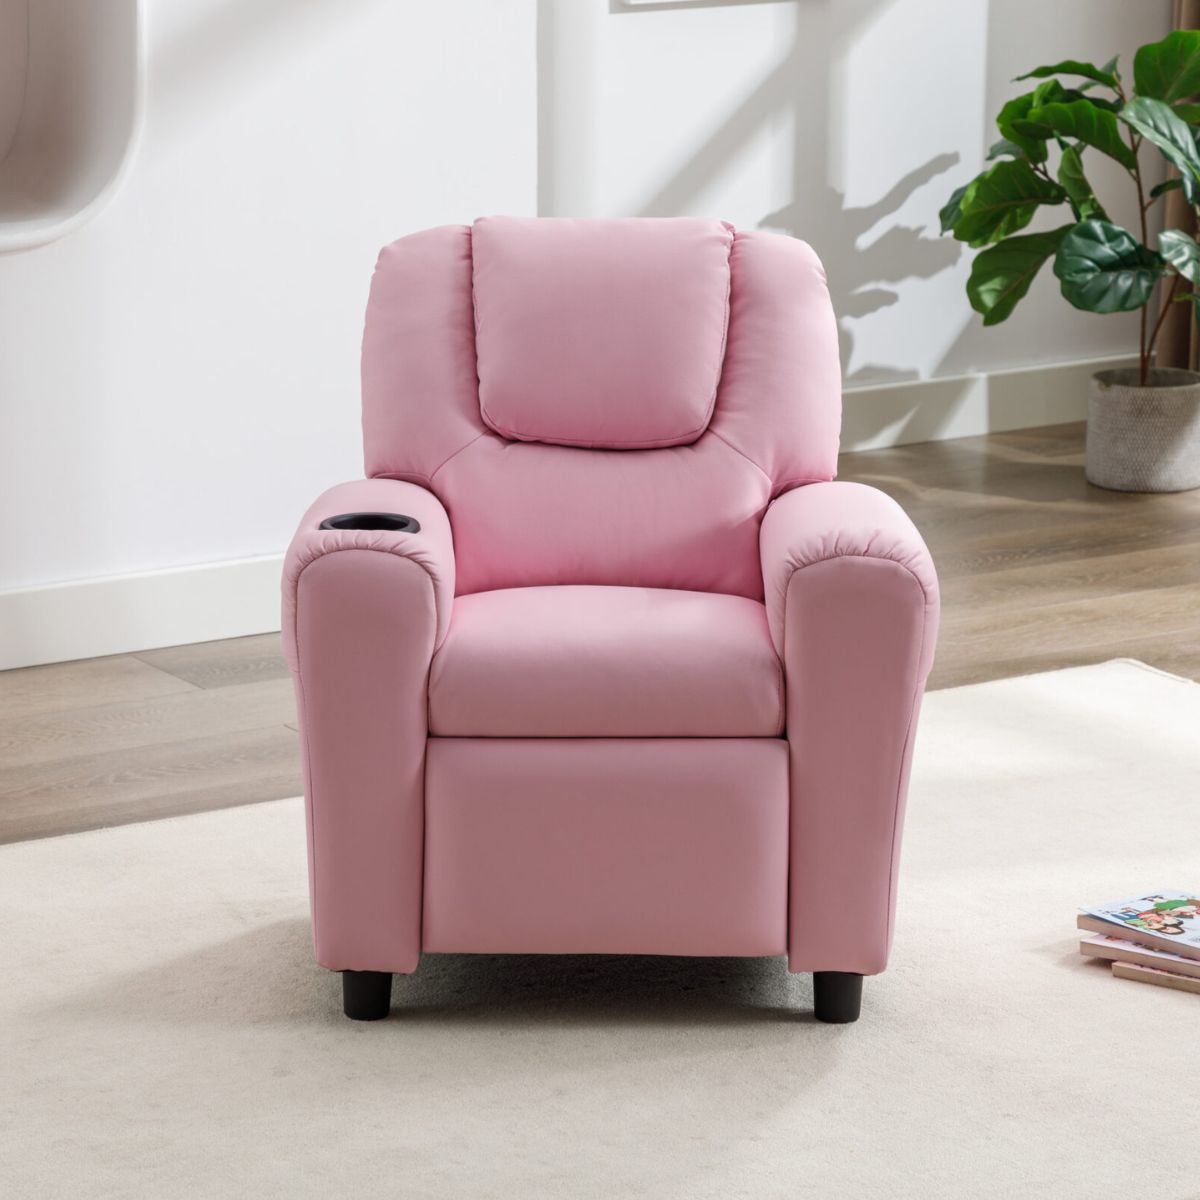 Kids Recliner Chair with Cup Holder Light Pink - 3